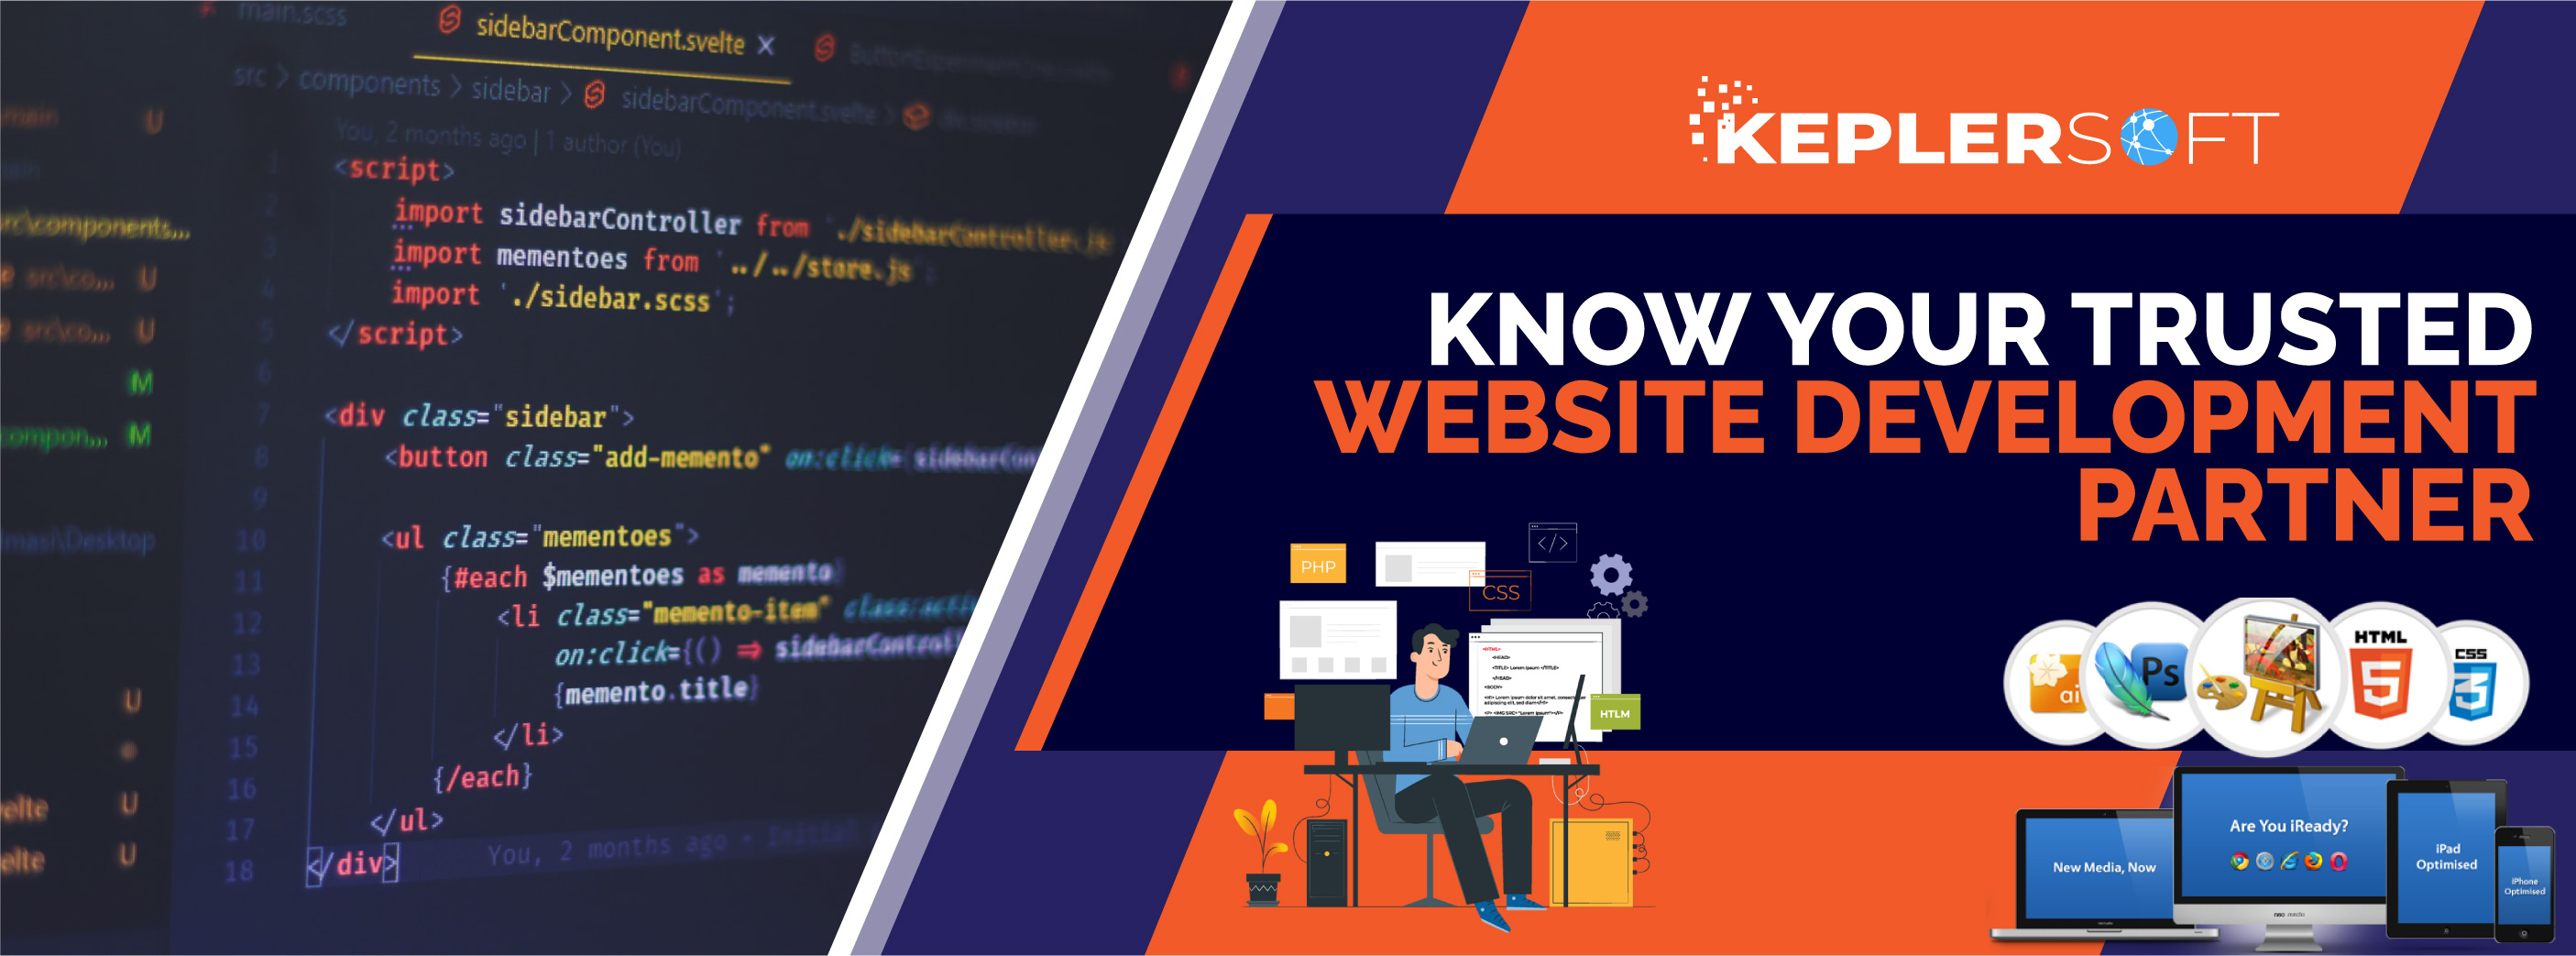 Know Your Trusted Website Development Partner